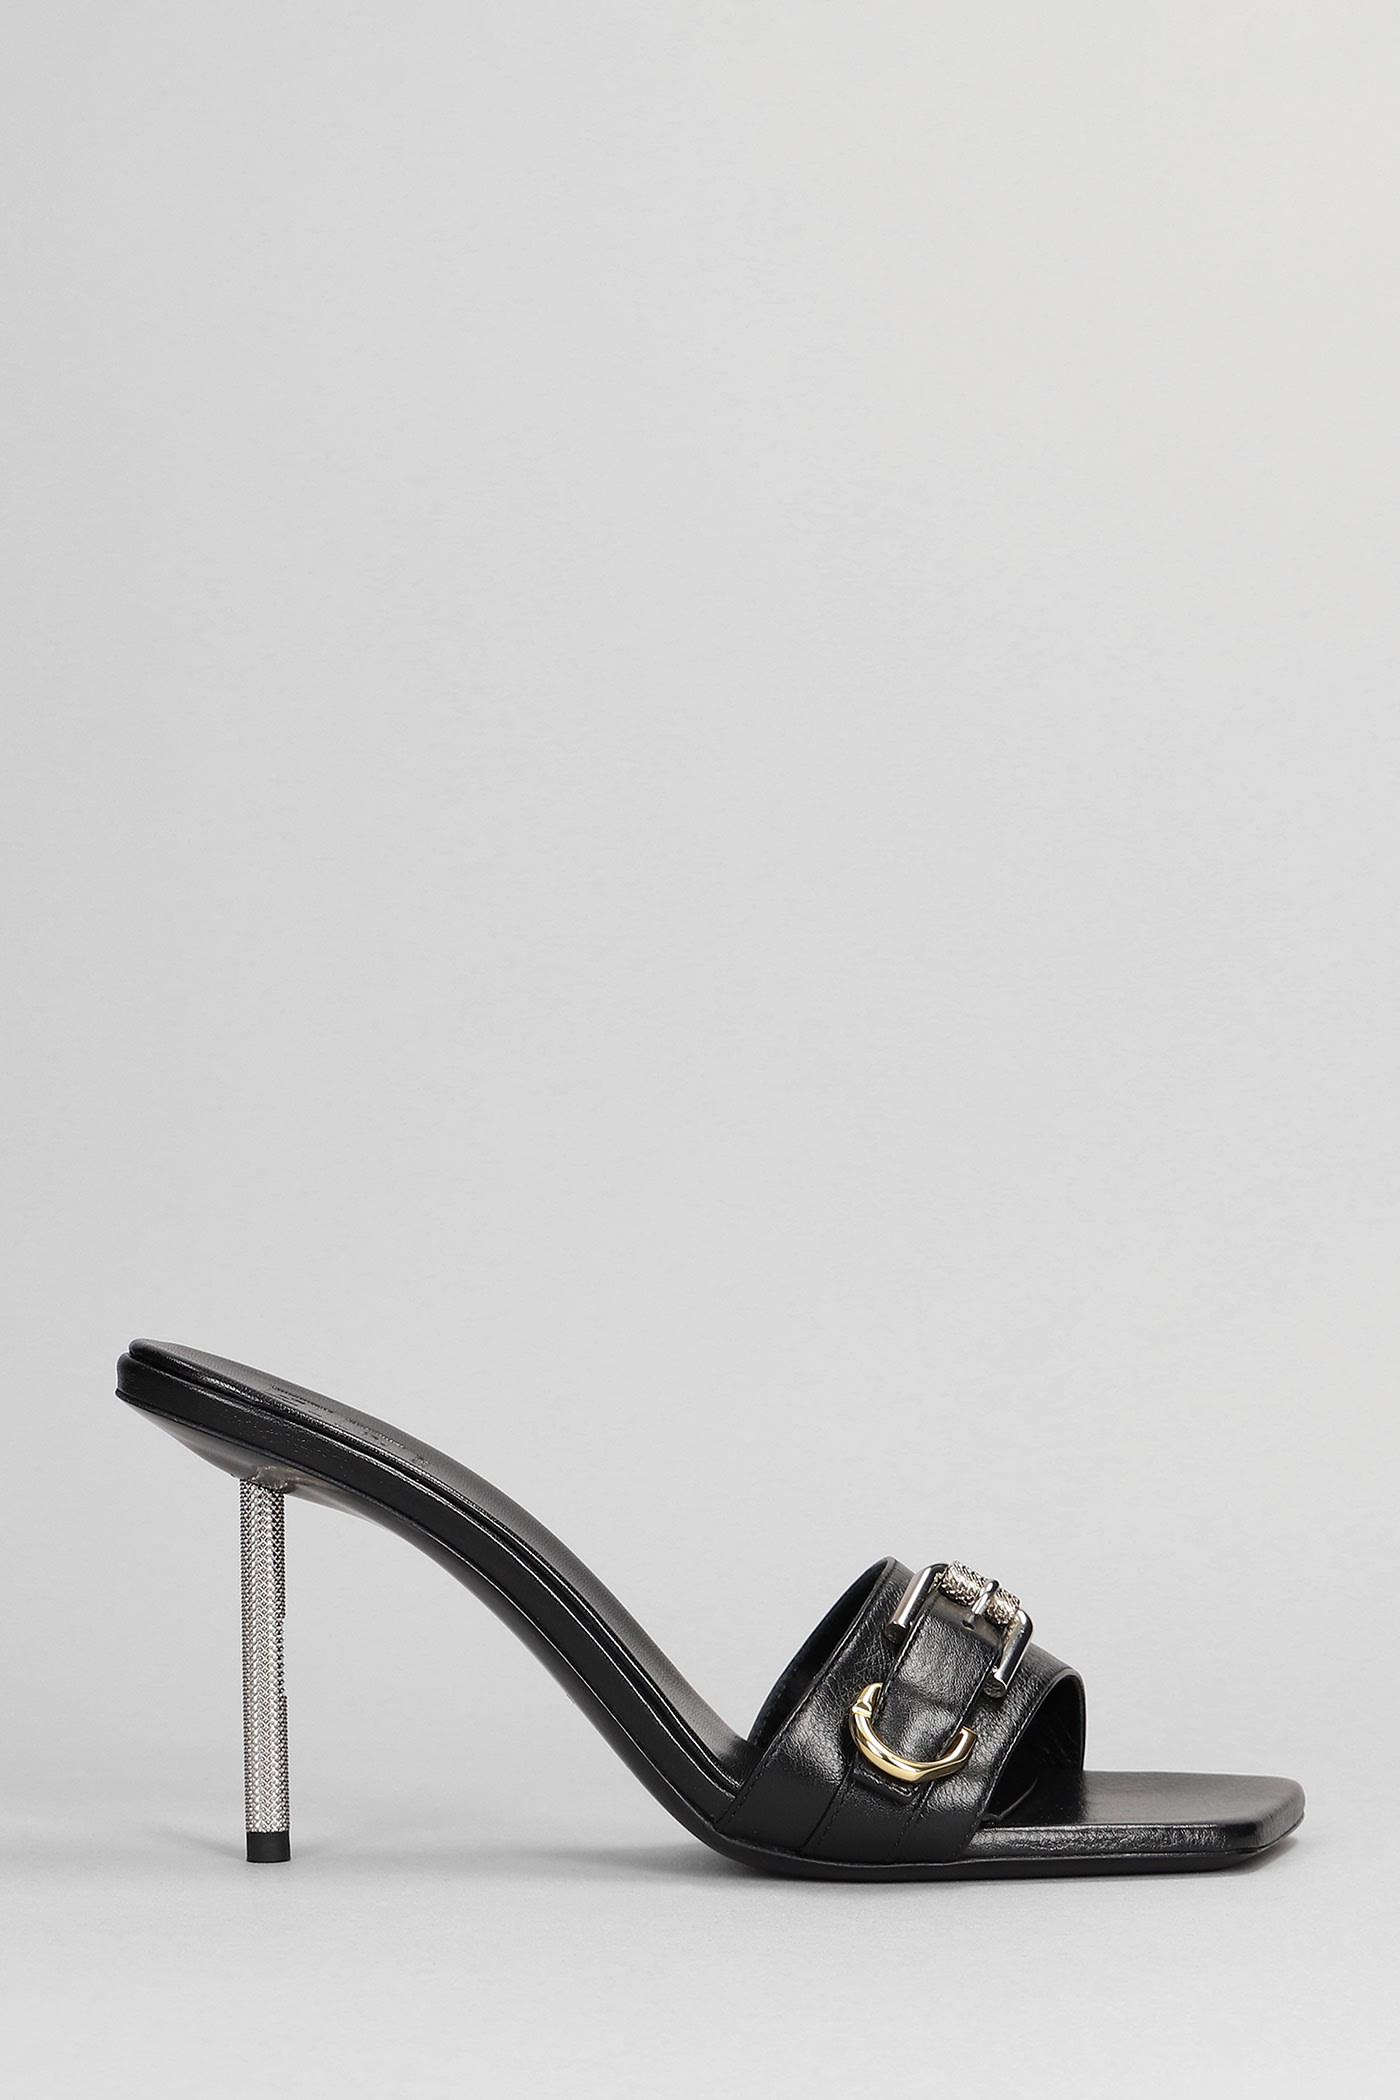 GIVENCHY STRAP HIGH SLIPPER-MULE IN BLACK LEATHER